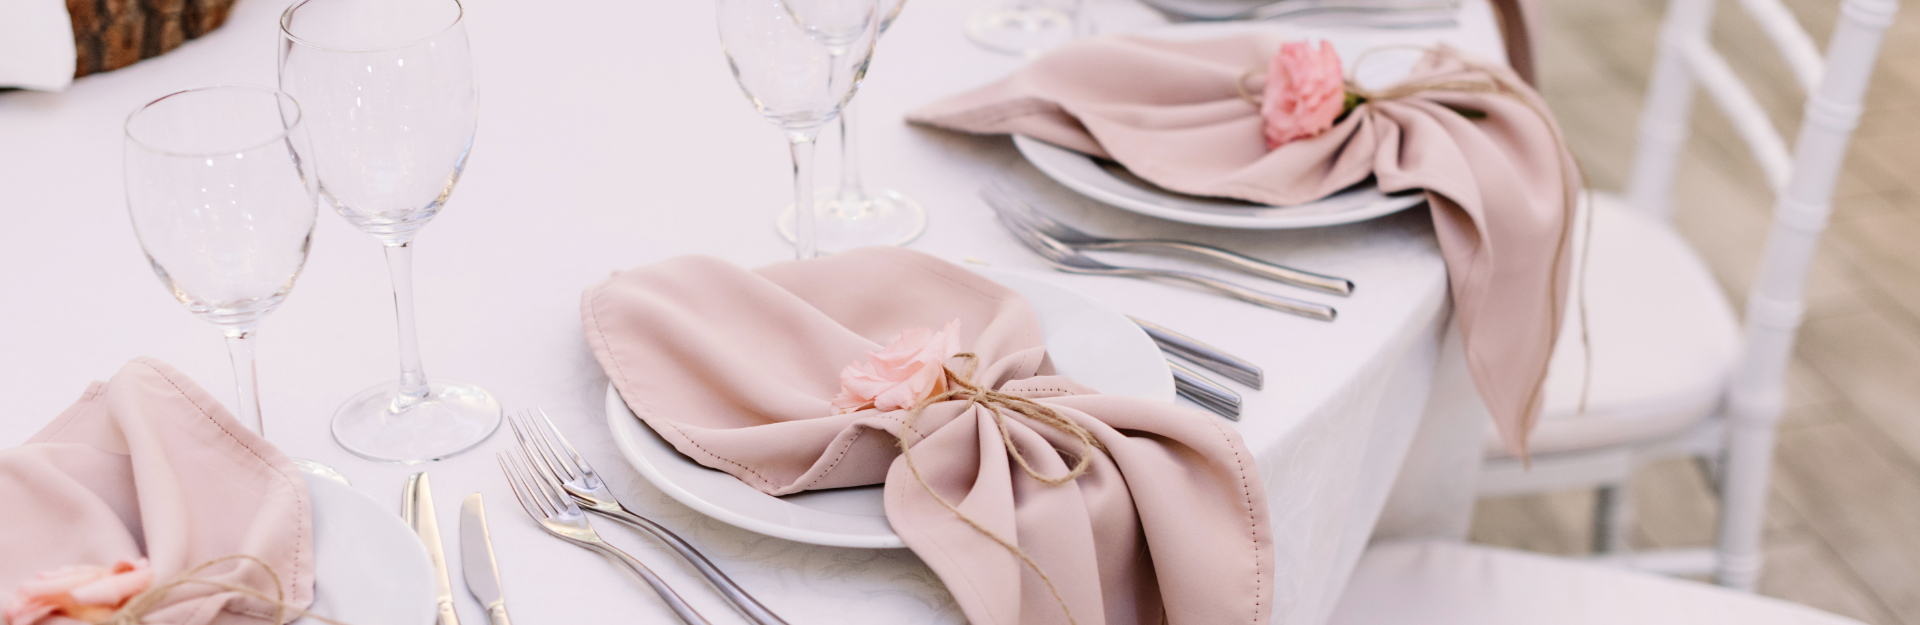 Pink linens on tableware at wedding reception